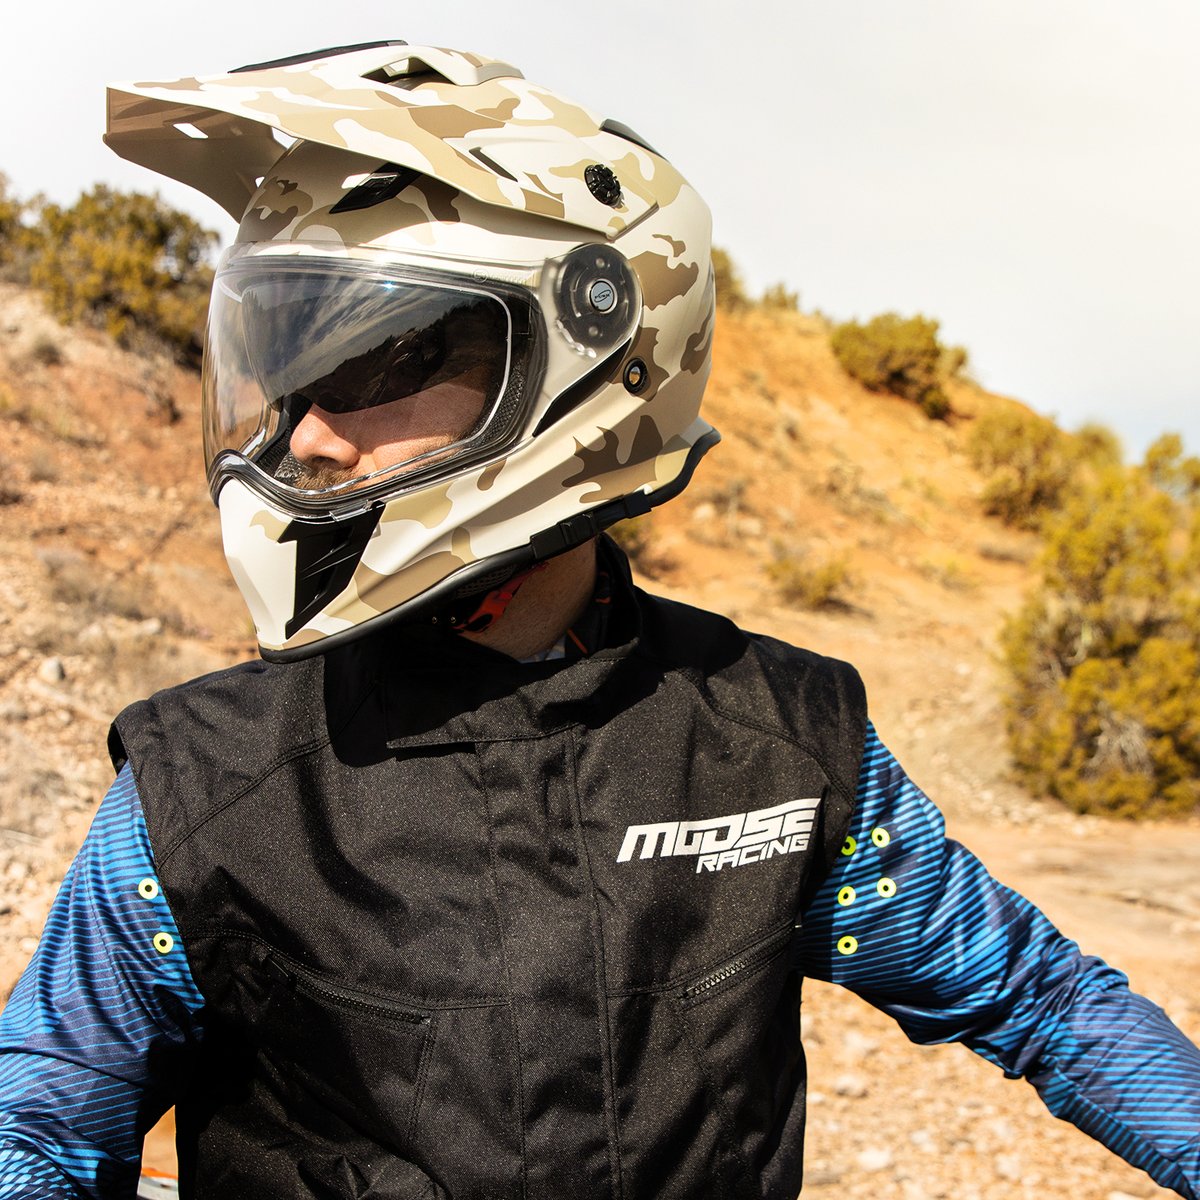 The all new Range Camo is here with the 2021 Spring release! Visit Z1R.com to view the rest of the line. #RideZ1R #official_z1r #motocross #motolife #dirtbike #dirthelmets #enduro #utv #atv